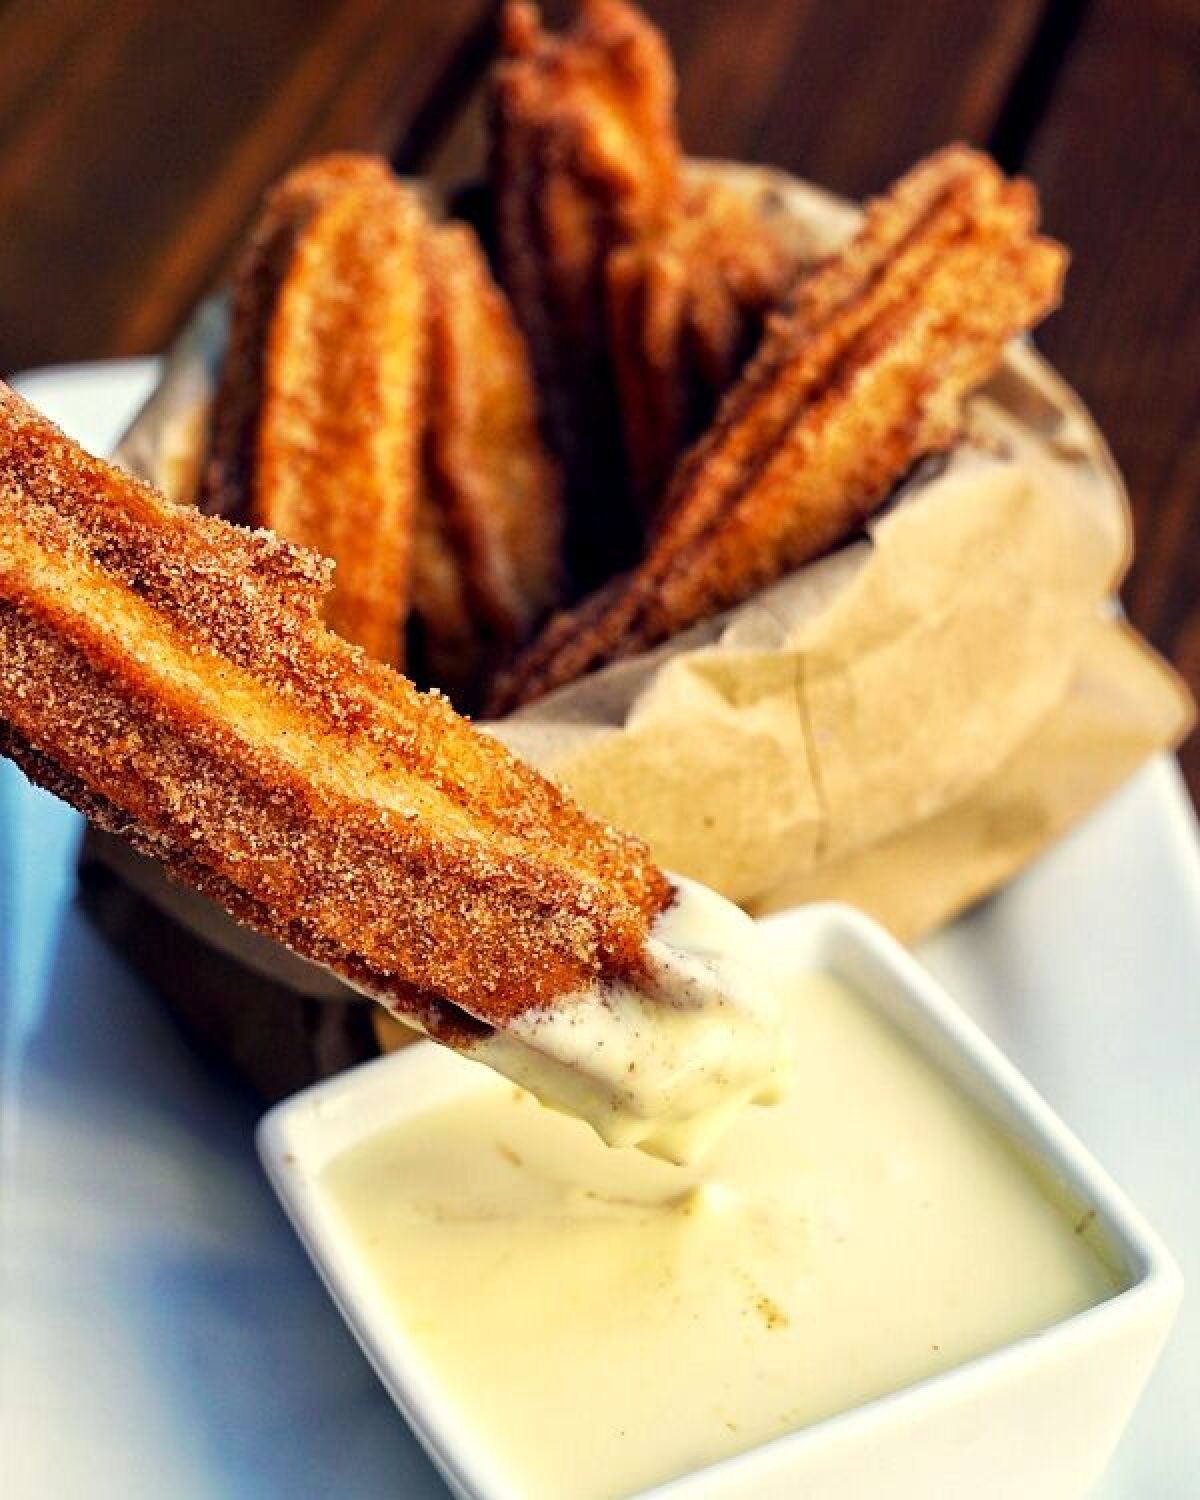 Blind burro makes gourmet churro dough with cinnamon water, then offers a creme Anglaise sauce for dipping.